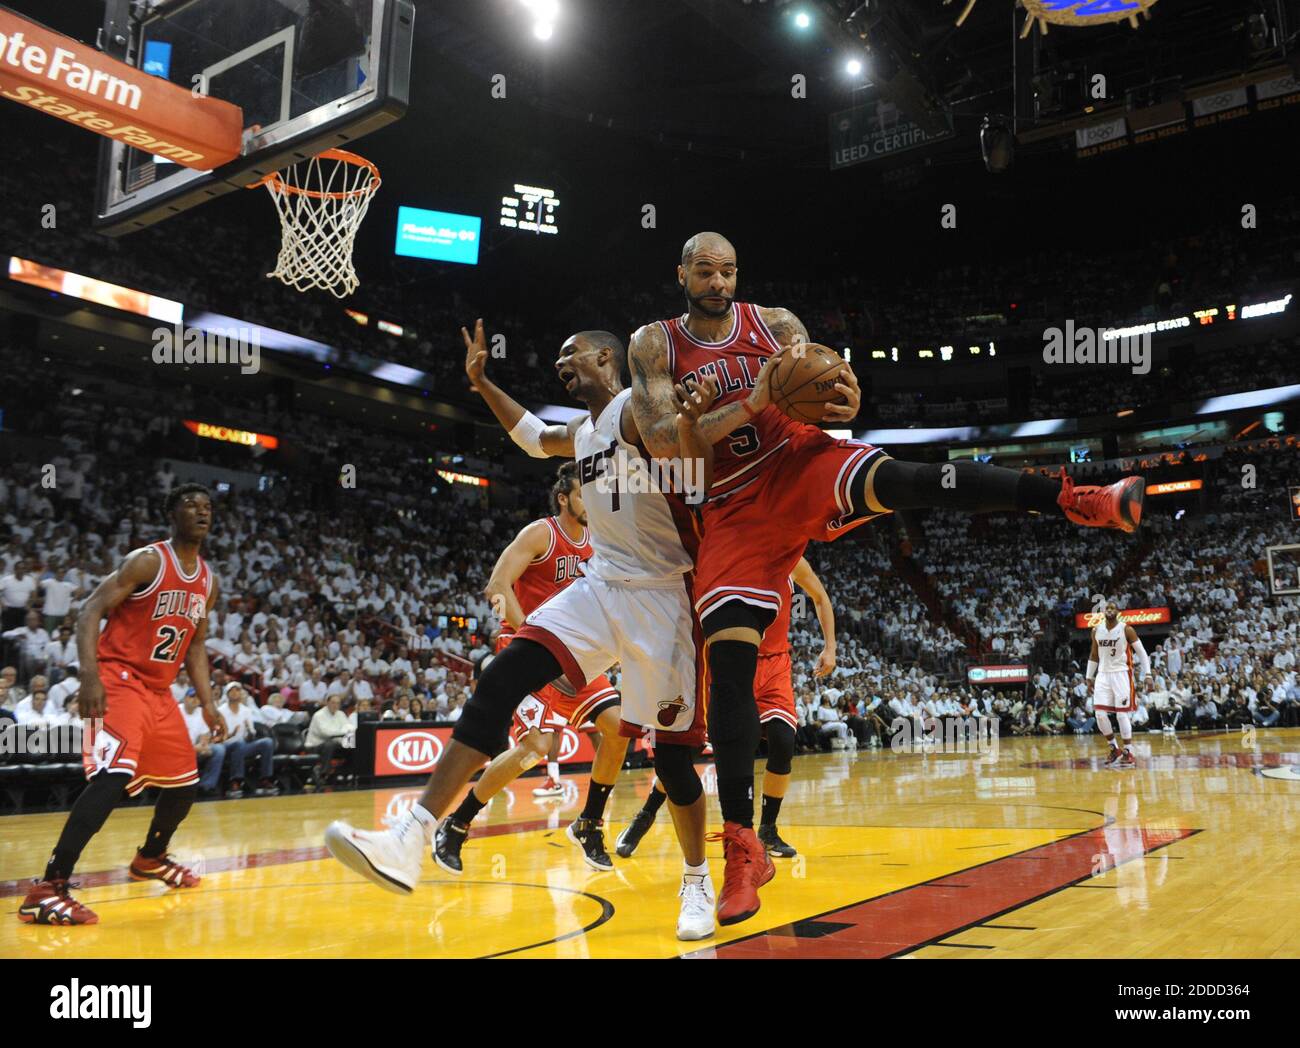 NO FILM, NO VIDEO, NO TV, NO DOCUMENTARY - Chris Bosh of the Miami Heat and Carlos Boozer of the Chicago Bulls battle for a rebound during the first quarter of the NBA Eastern Conference playoffs at the AmericanAirlines Arena in Miami, Florida, USA on Wednesday, May 6, 2013. Photo by Joe Cavaretta/Sun Sentinel/MCT/ABACAPRESS.COM Stock Photo